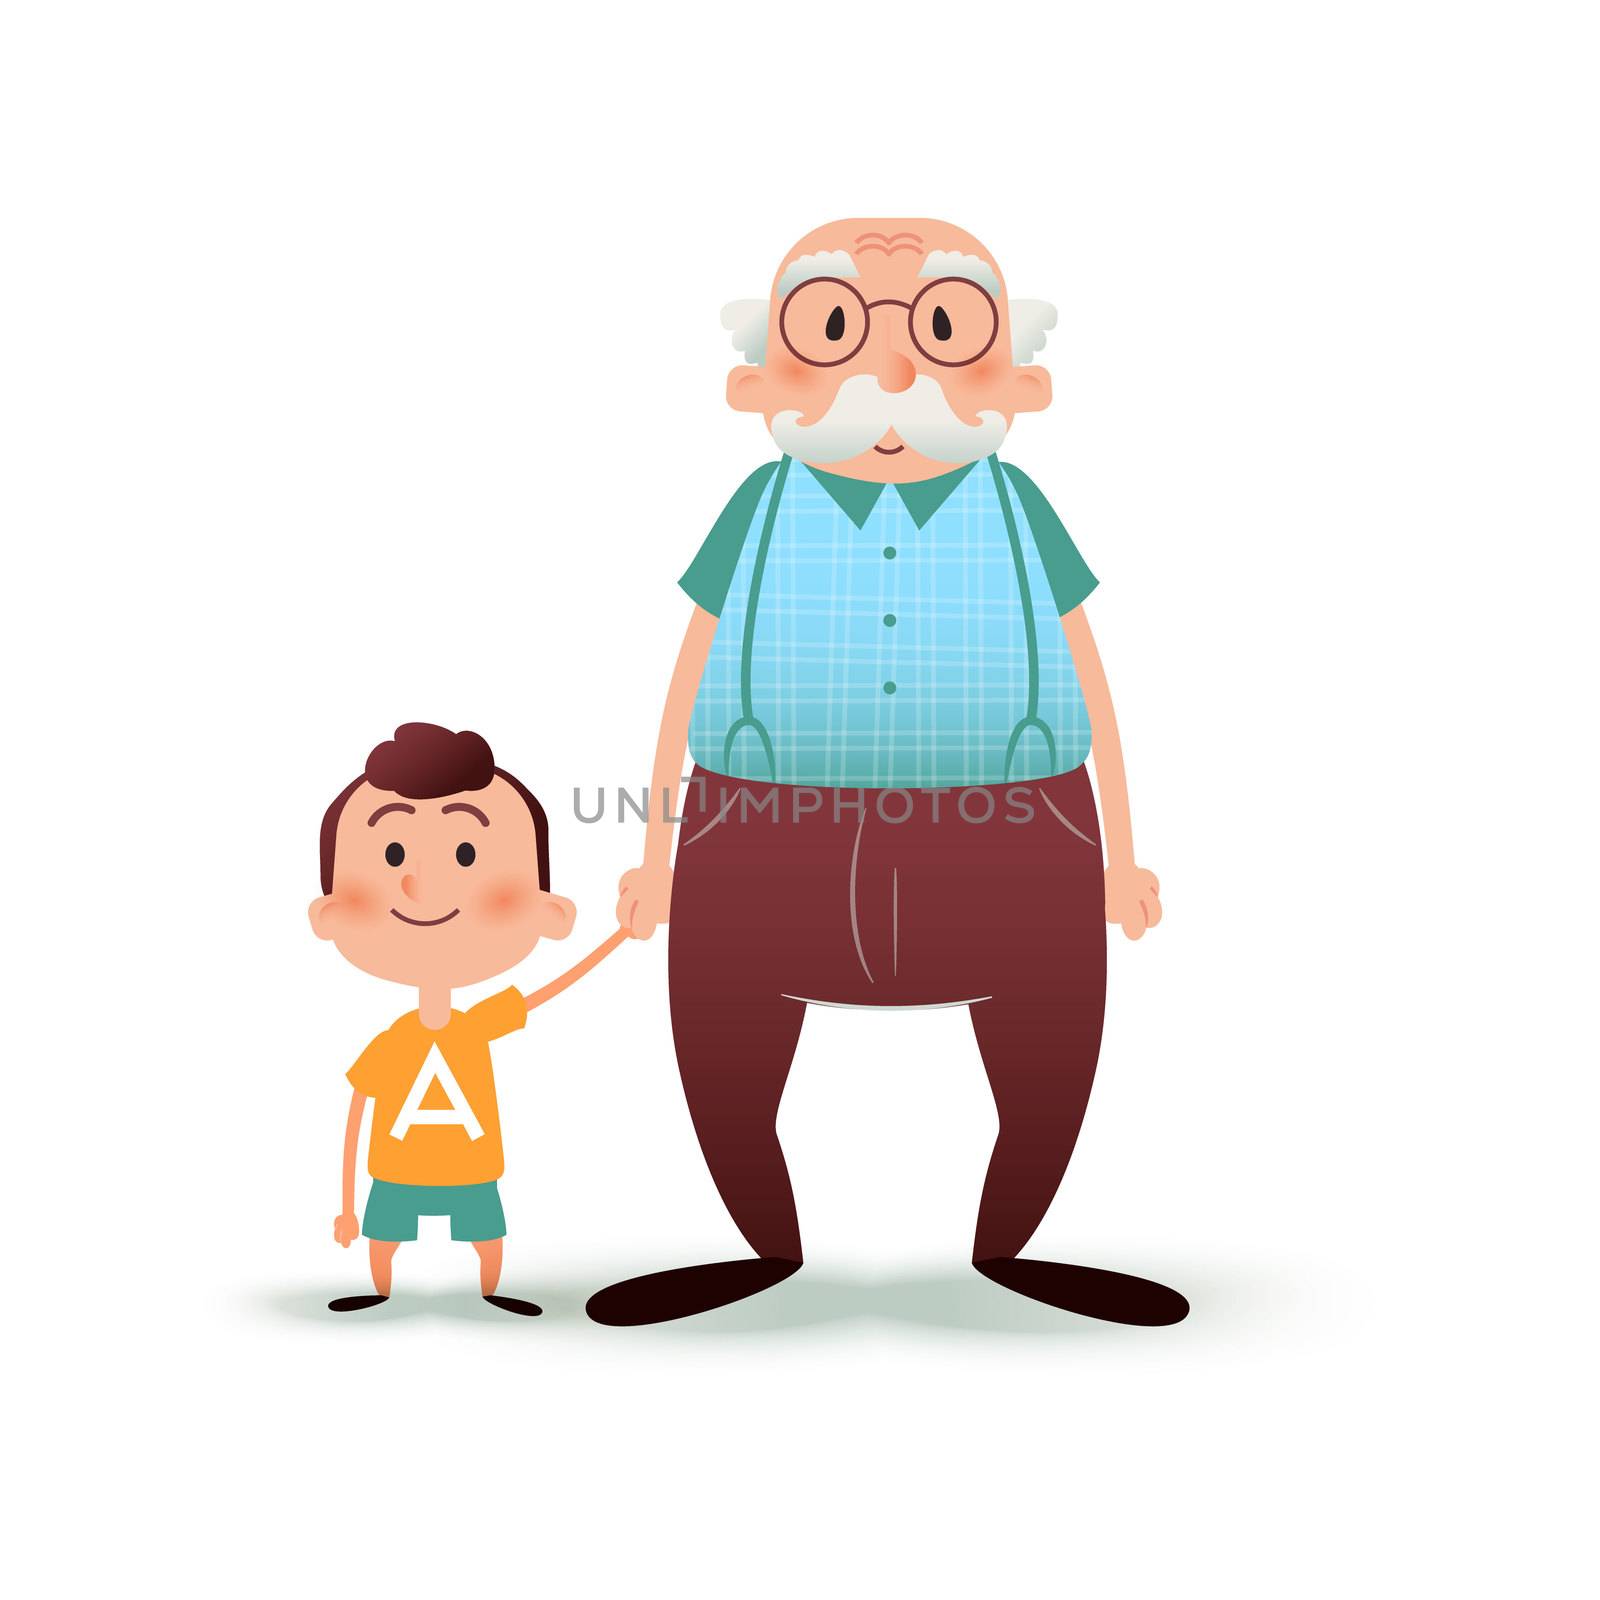 Grandfather and grandson holding hands. Little boy and old man cartoon illustration. Happy family concept. by Elena_Garder